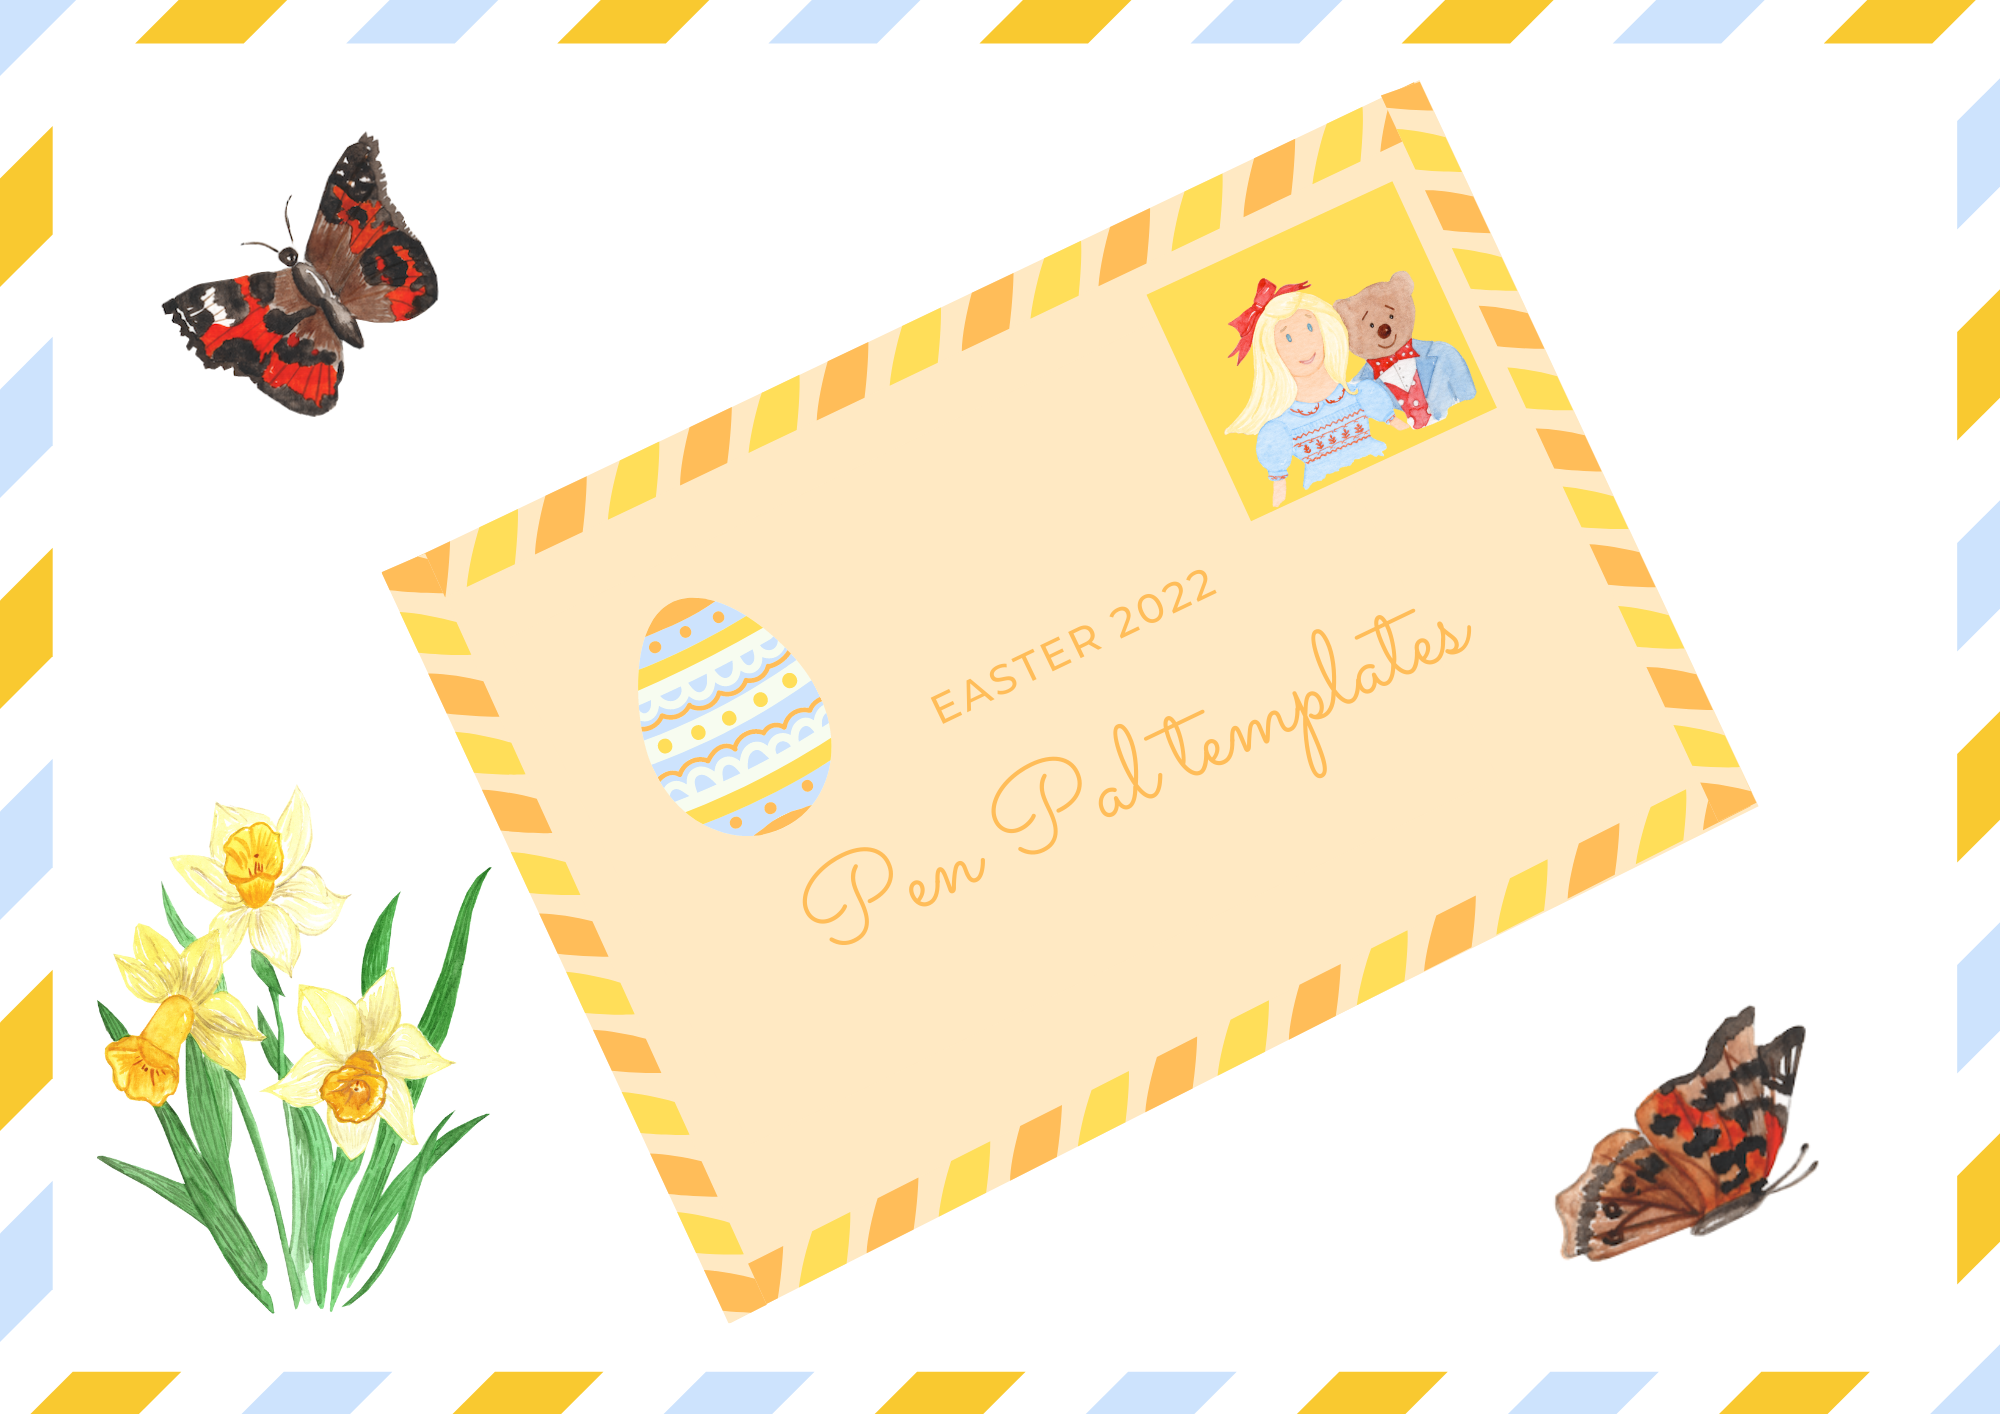 Easter holiday fun and creative Pen Pal template for children Charlotte sy Dimby - Charlotte and Burlington